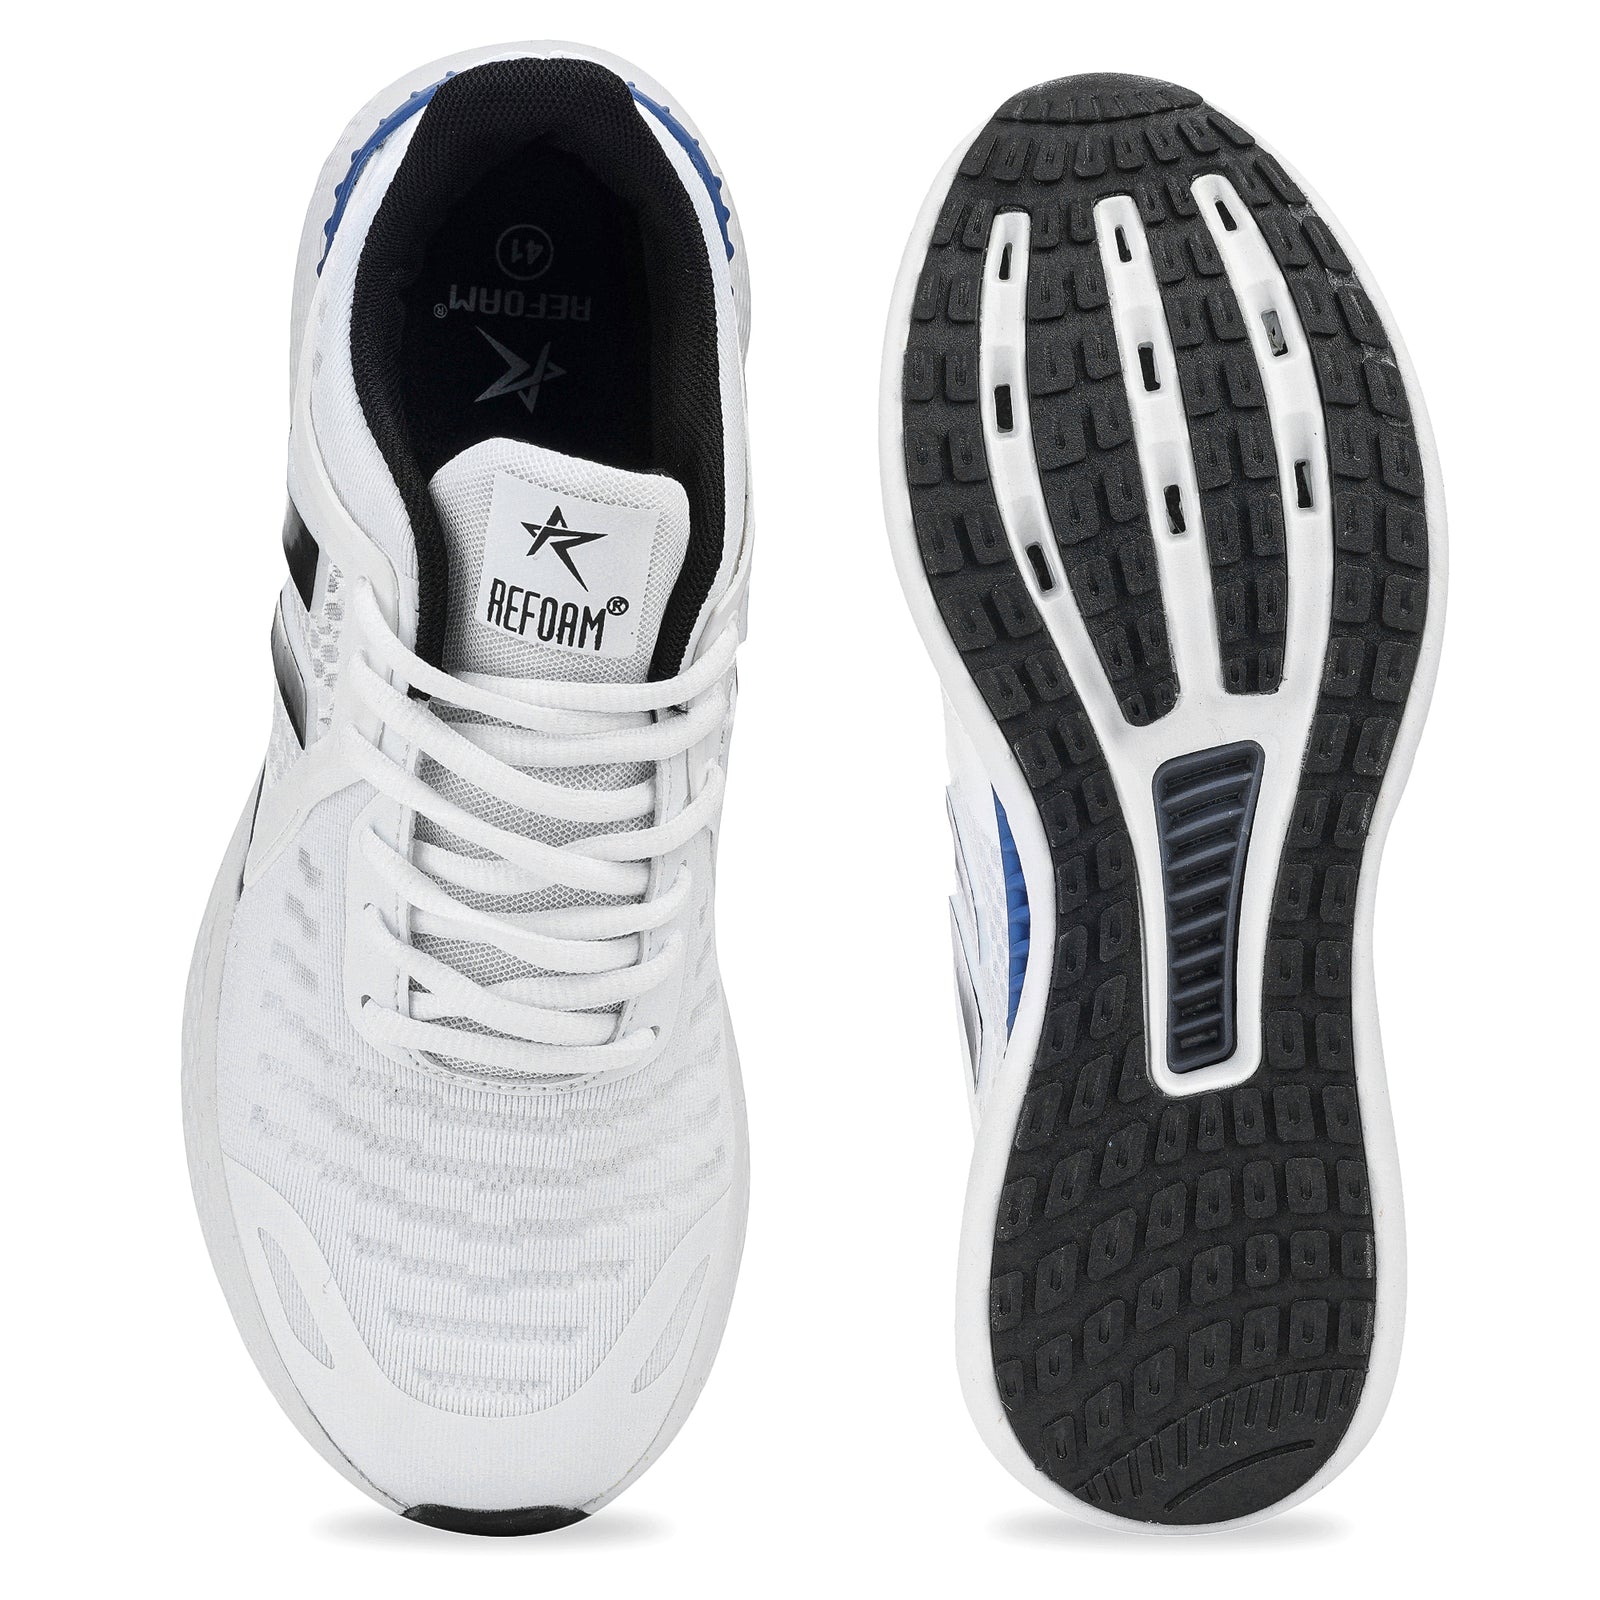 White & Black Solid Mesh Lace Up Sneakers For Men